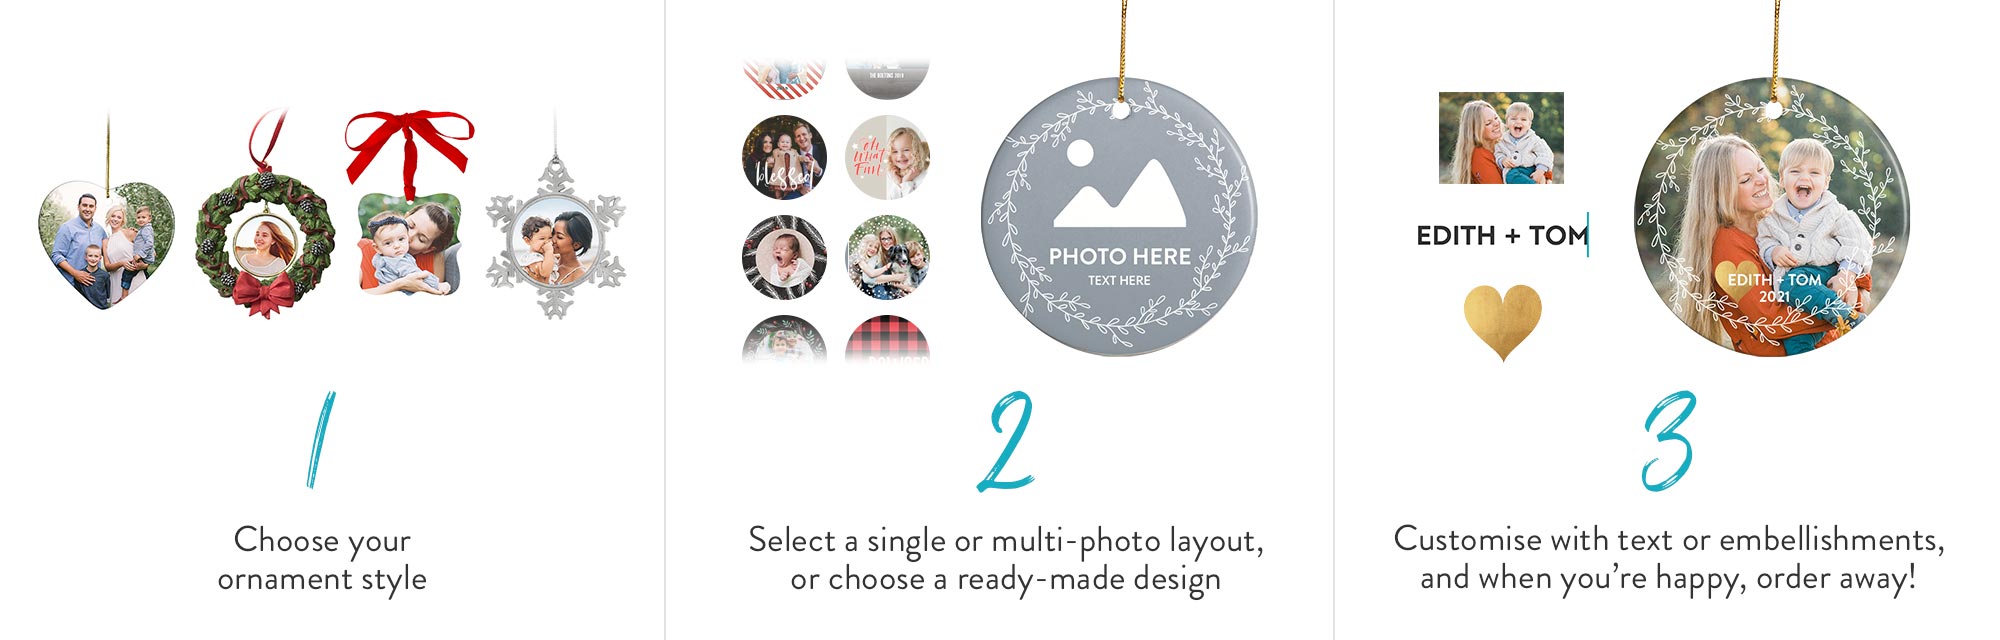 Create your ornament in 3 easy steps